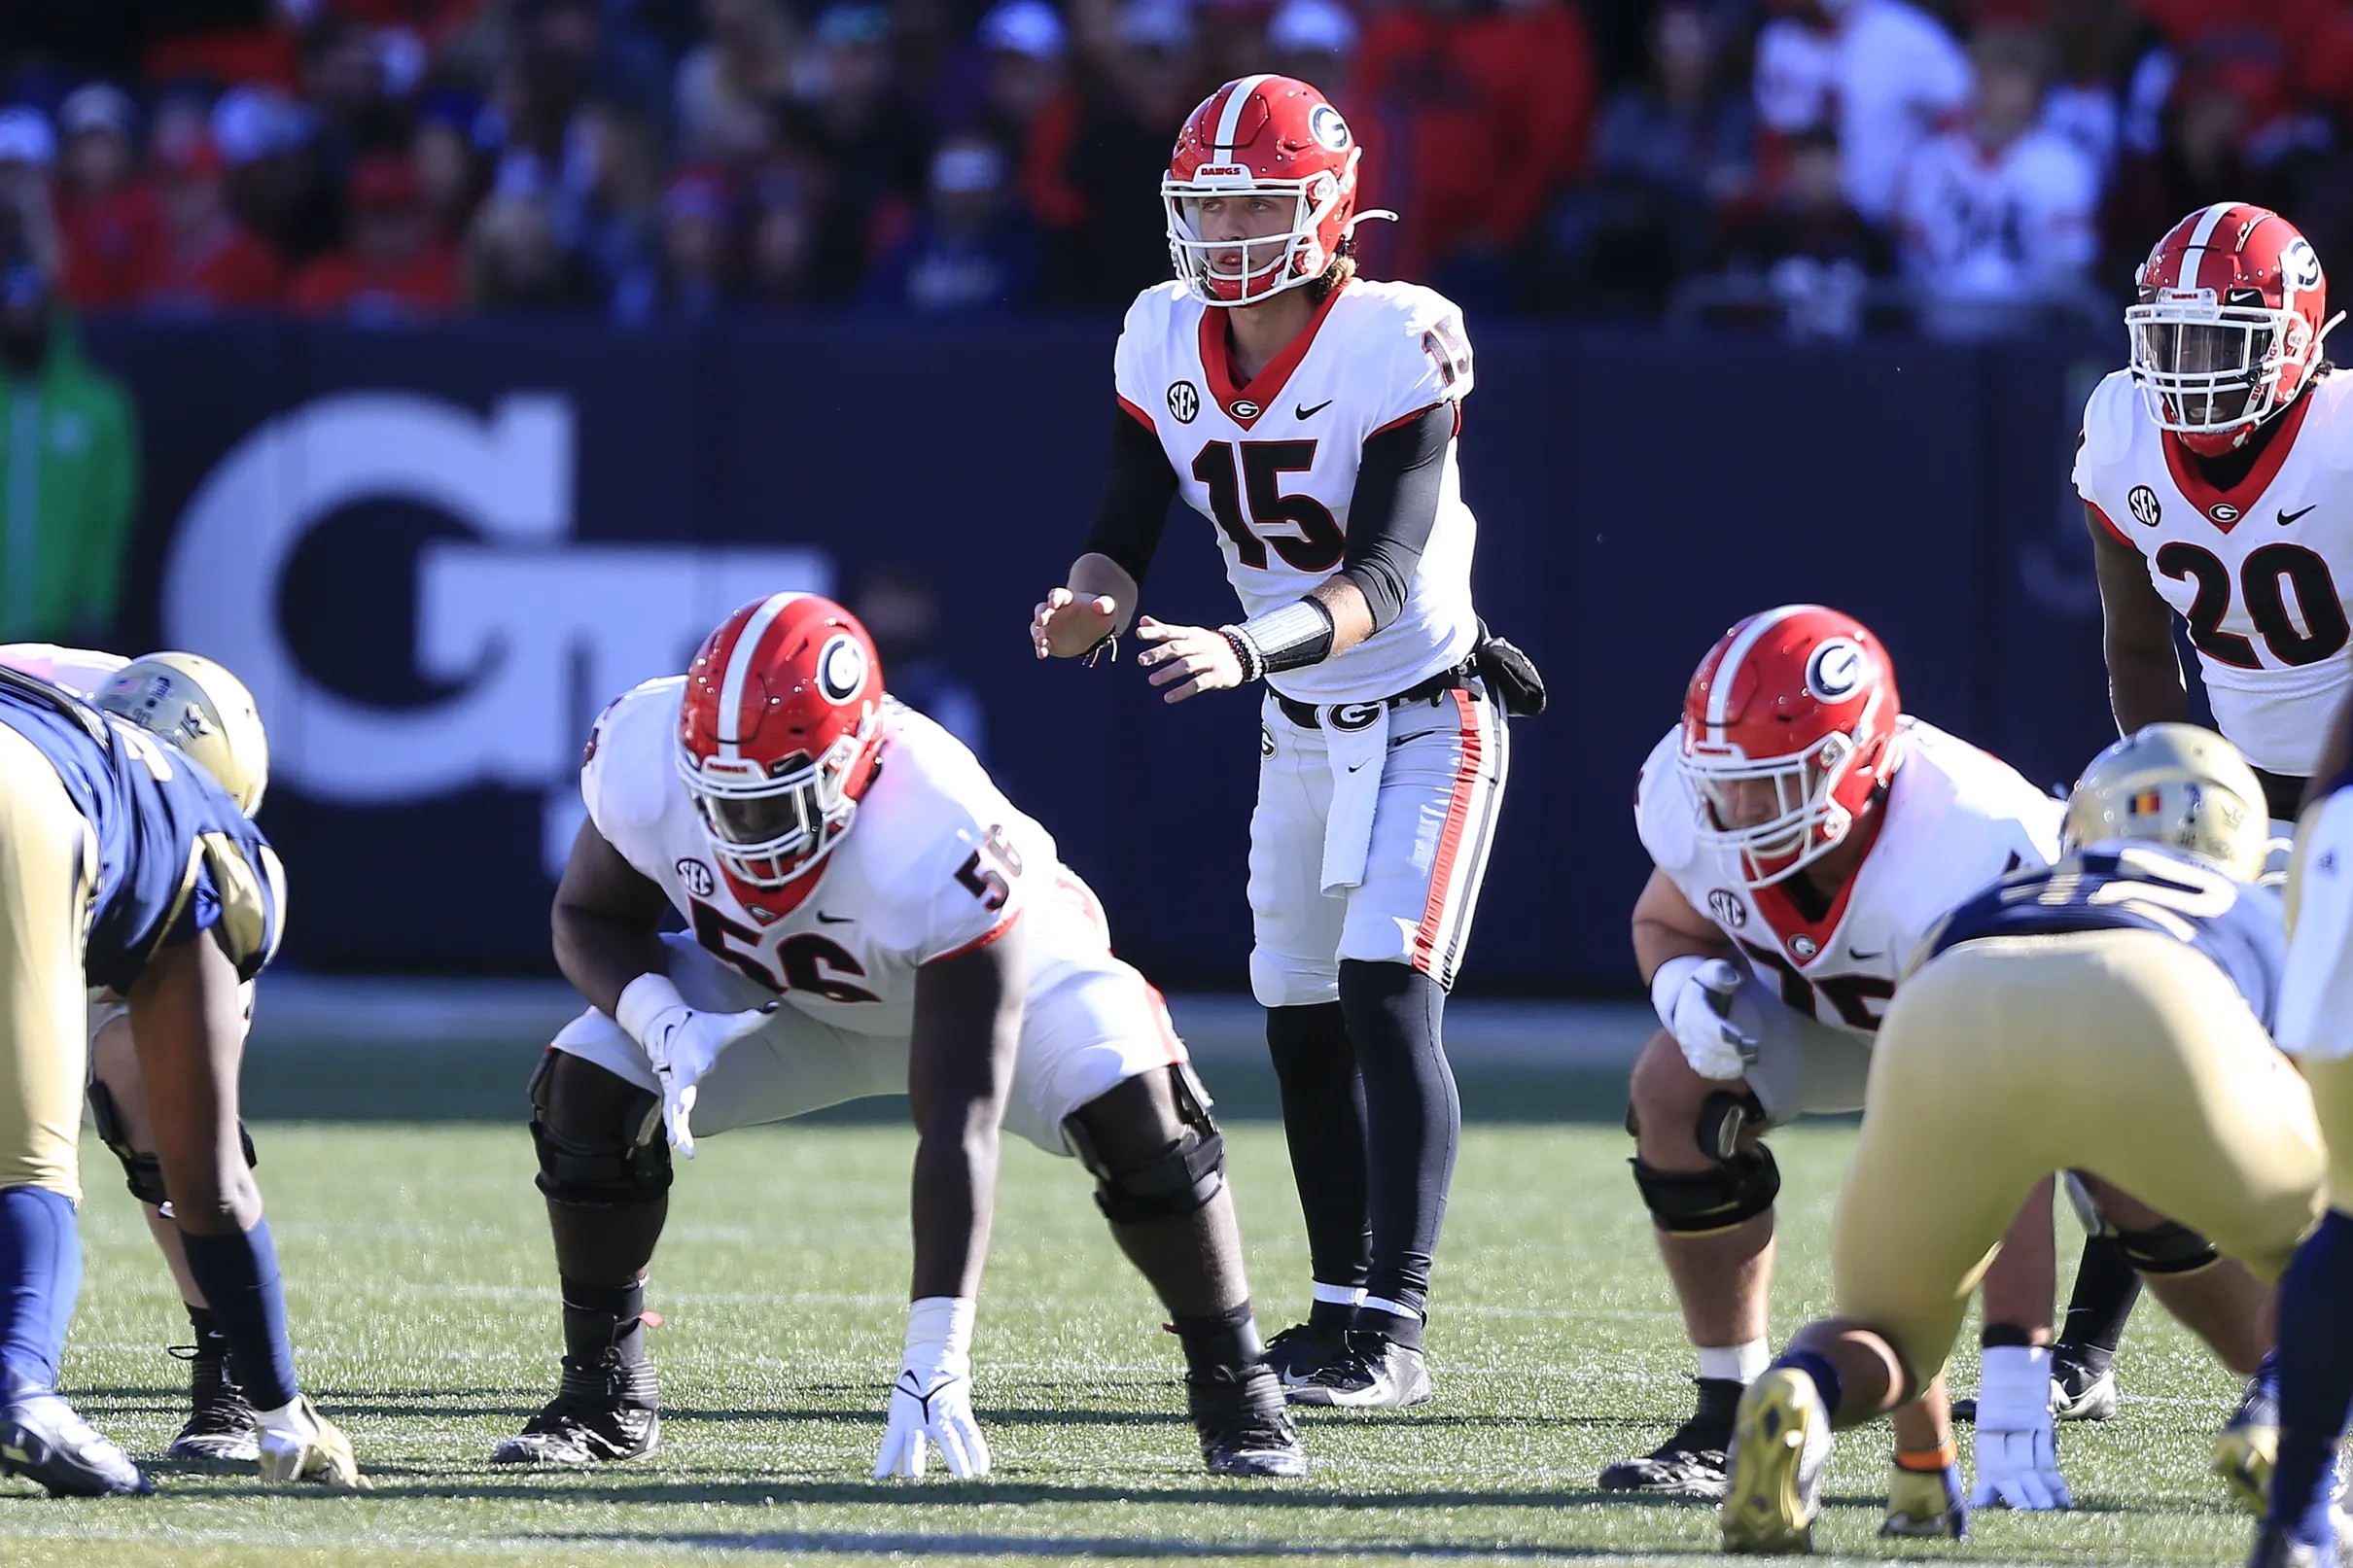 Sources Share Intel on UGA Spring Practice Beck Makes His Move